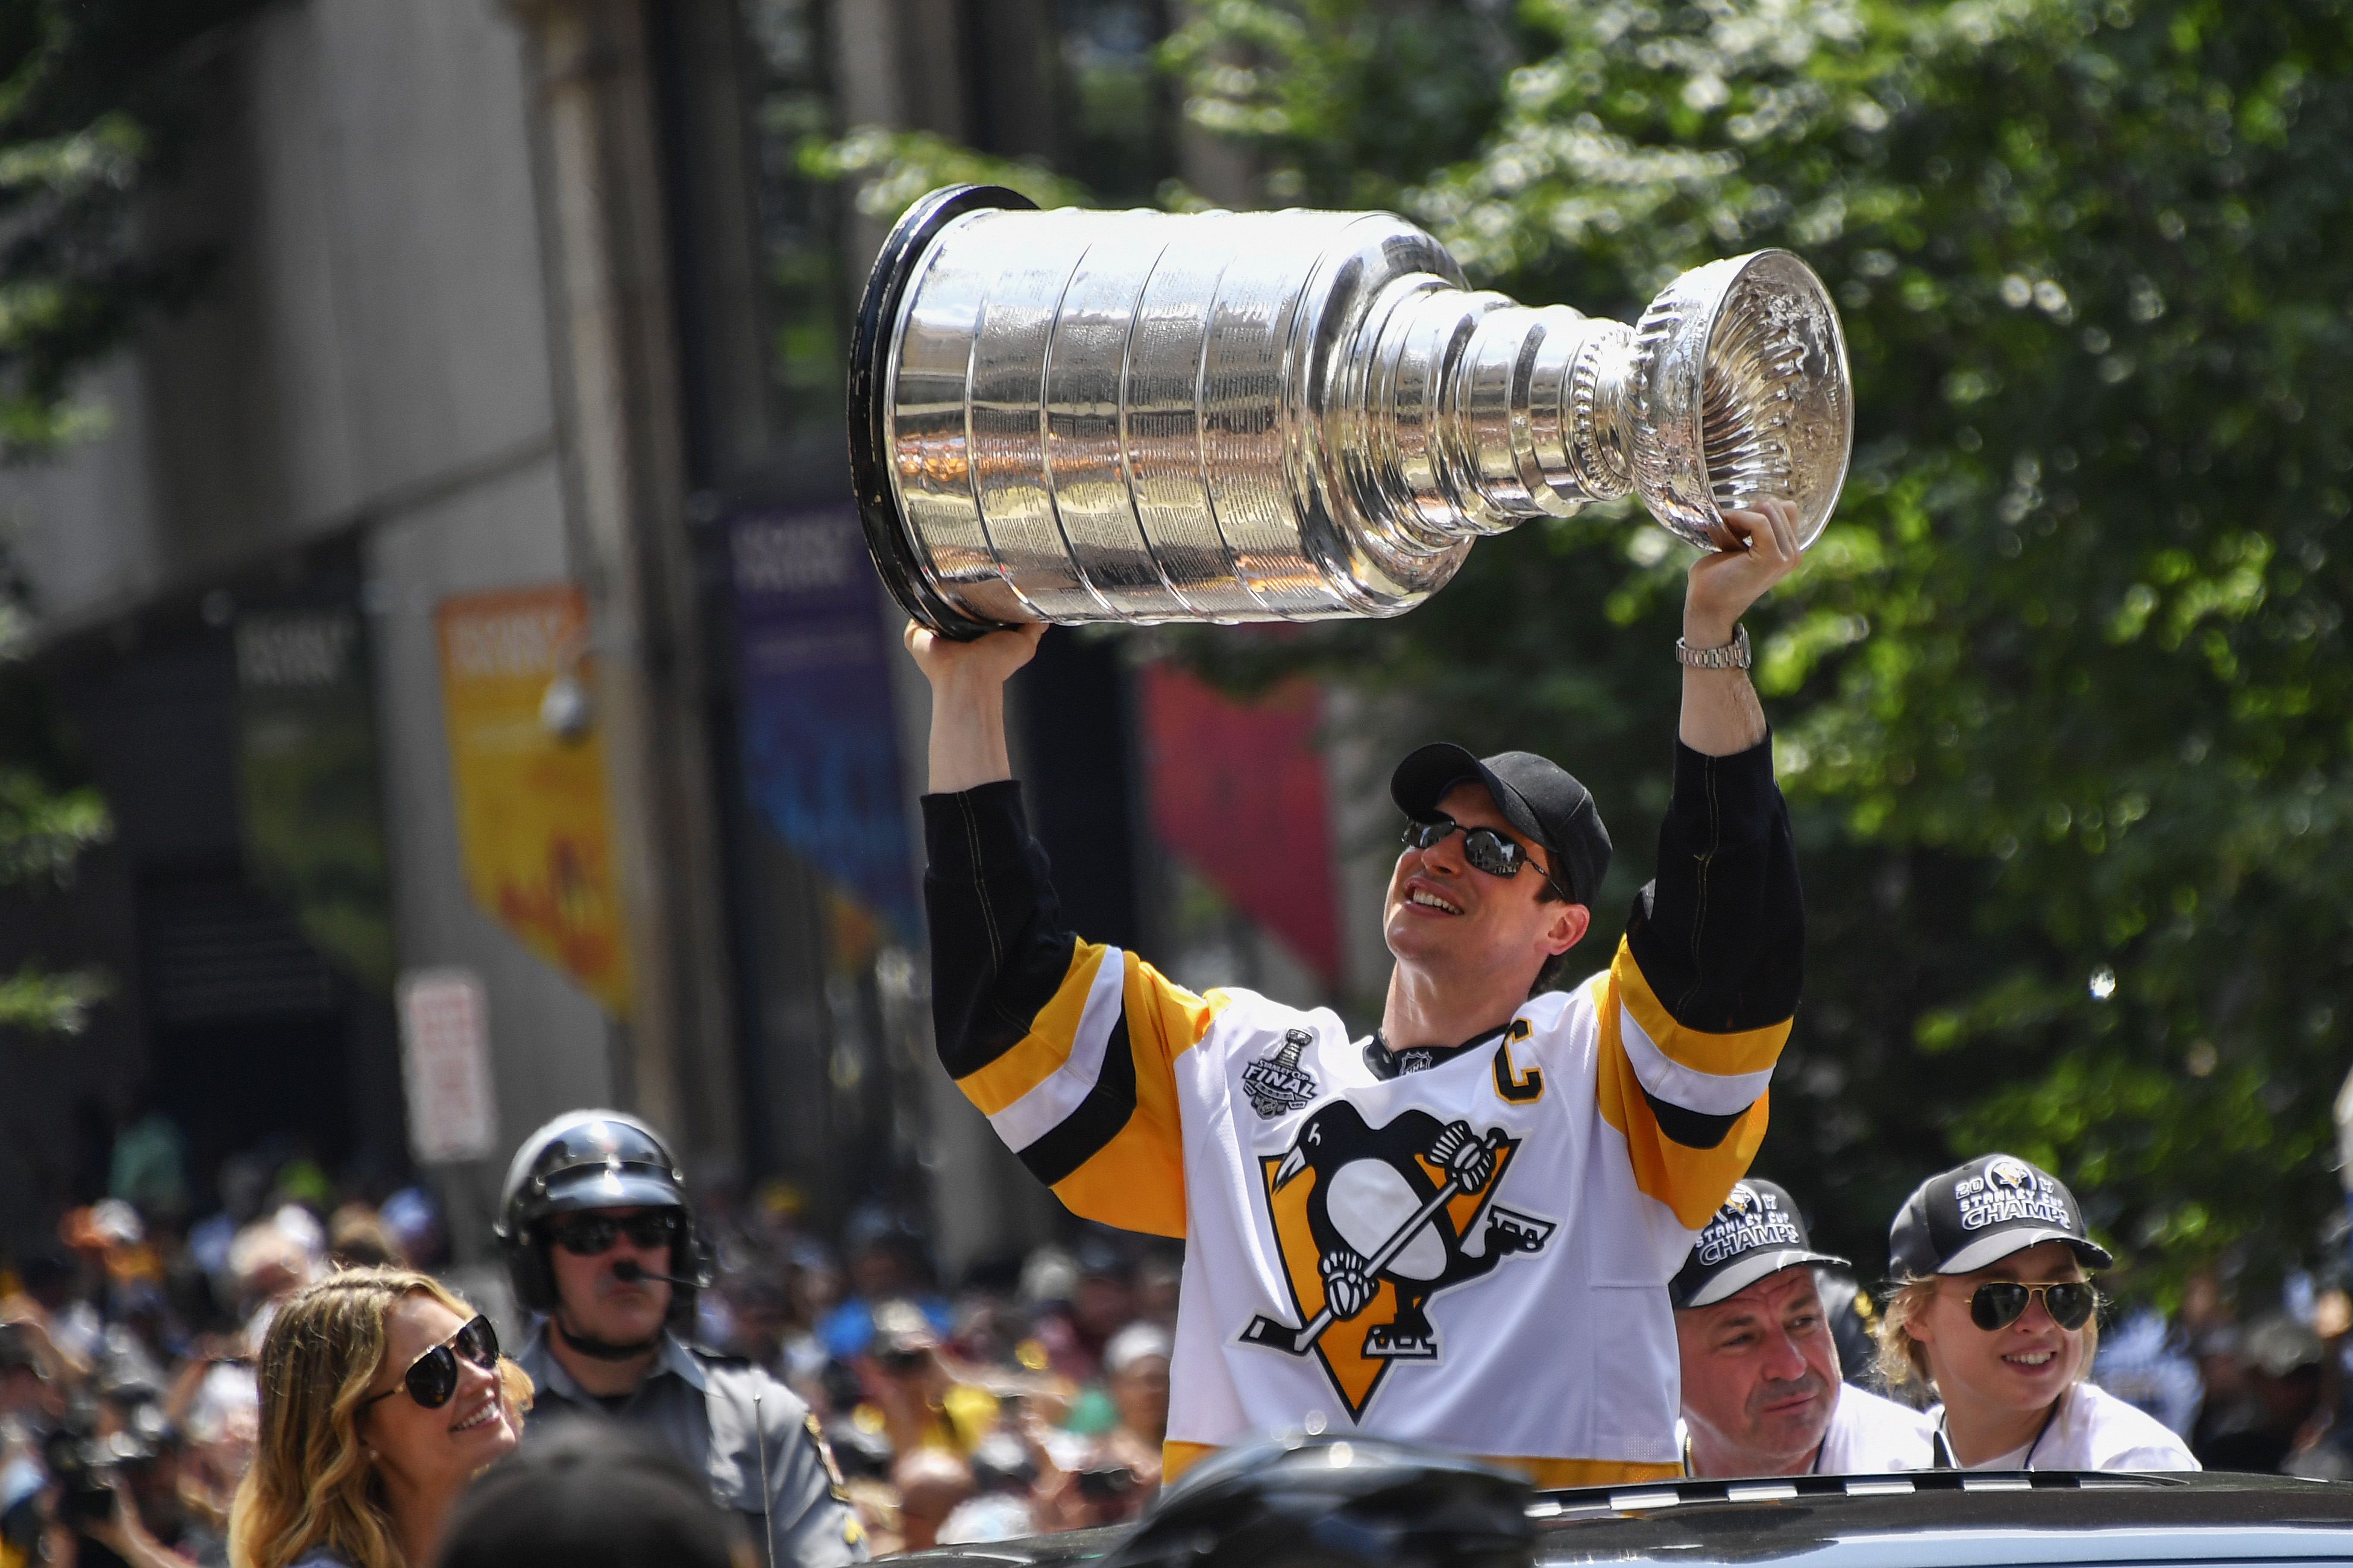 Stanley Cup playoffs: Penguins' Sidney Crosby injures upper body